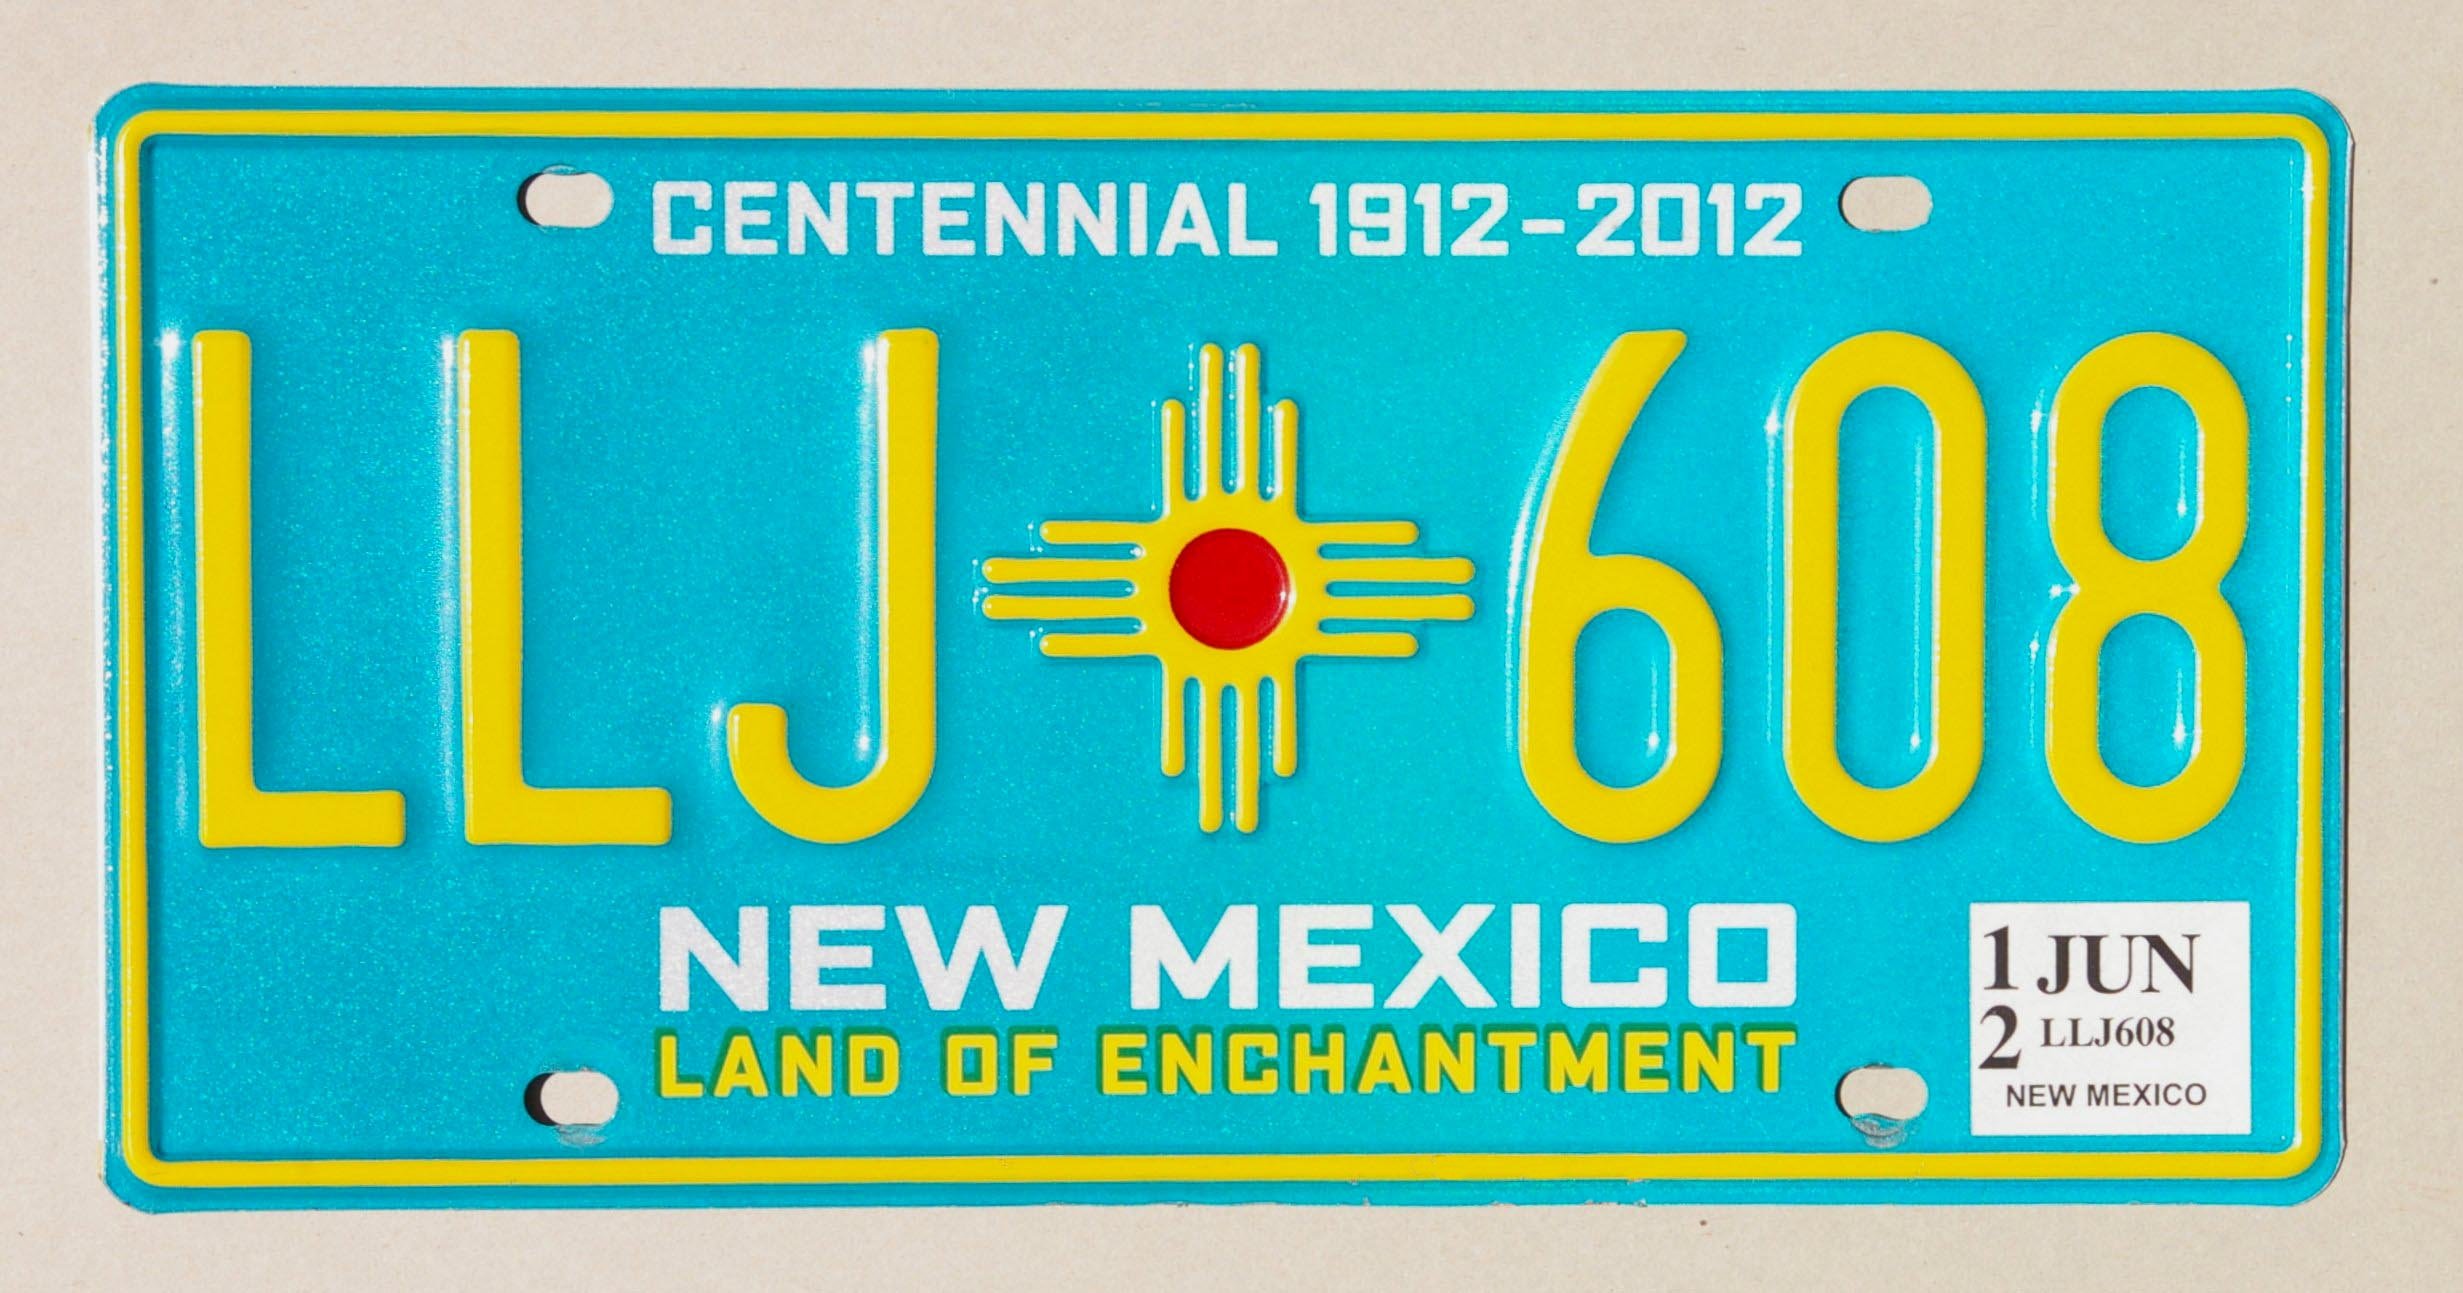 New Mexico green license plate